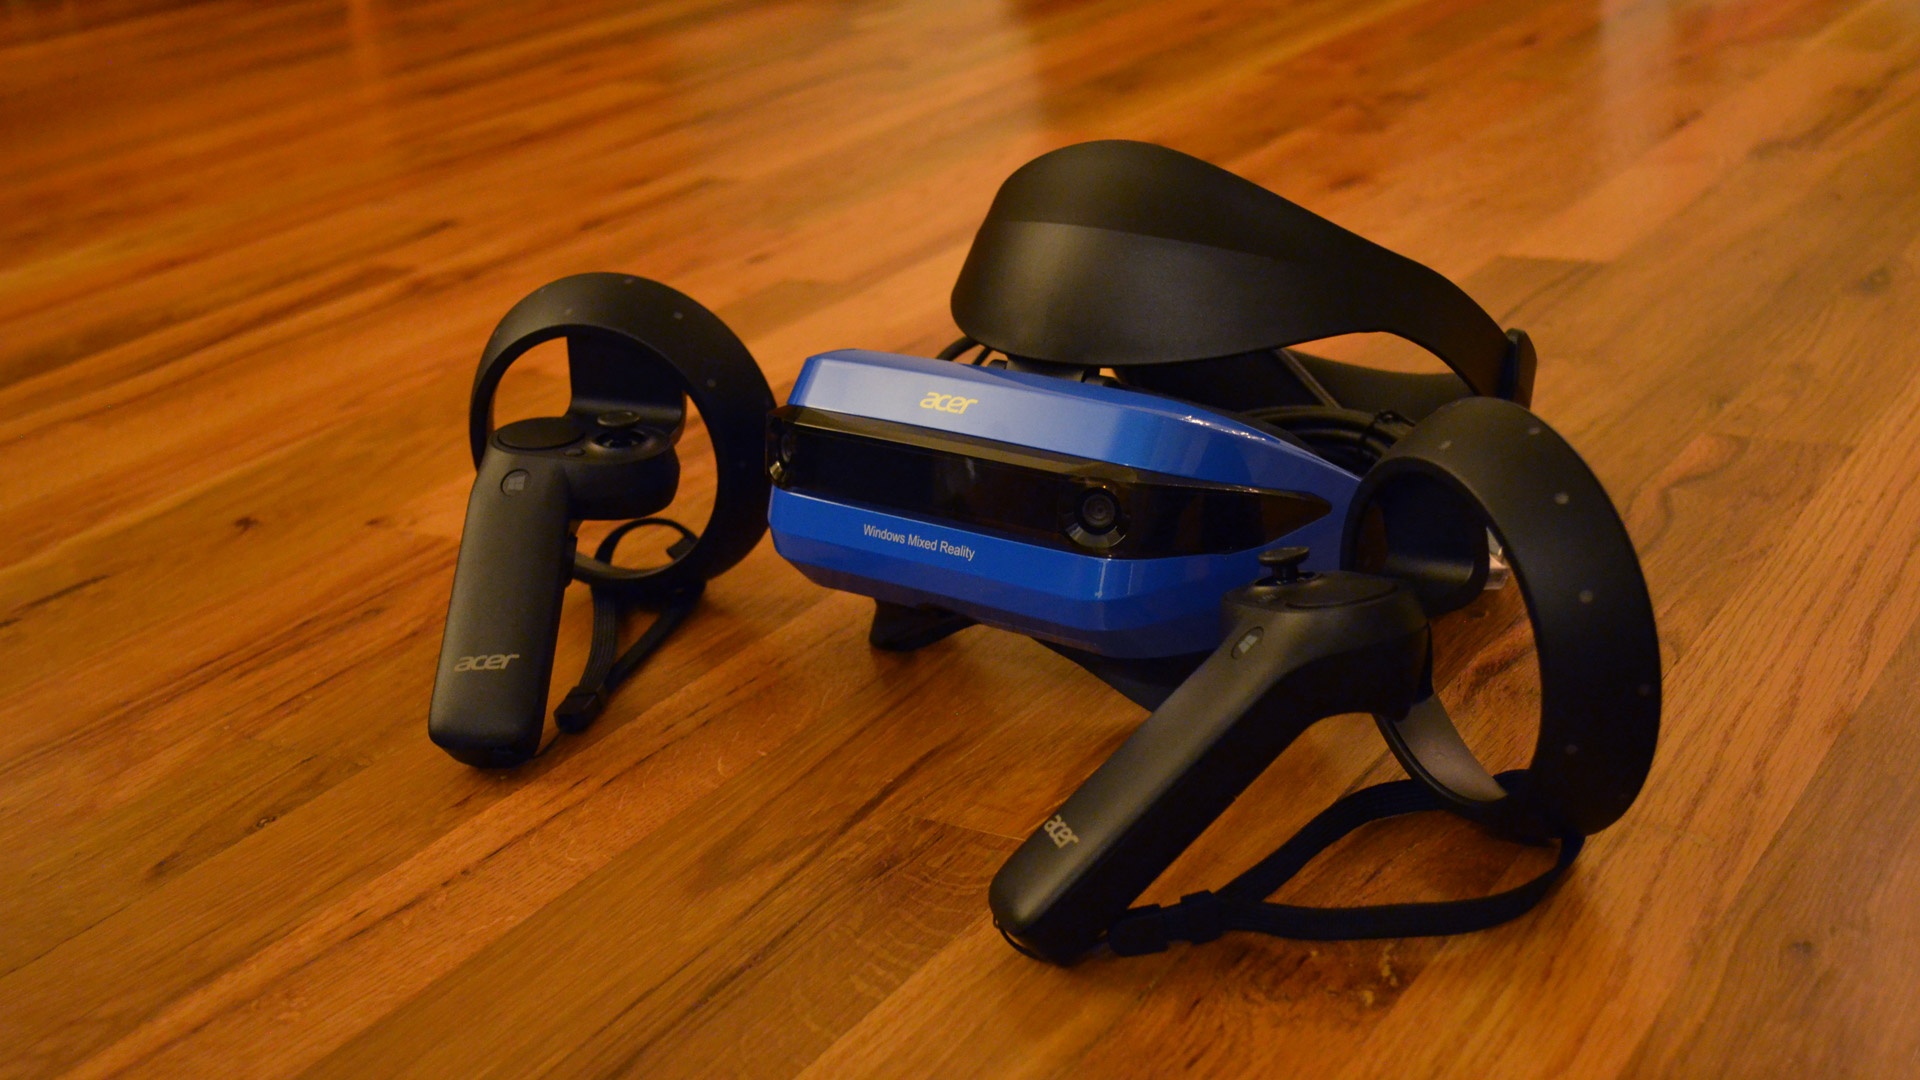 Acer Windows Mixed Reality VR Headset Review